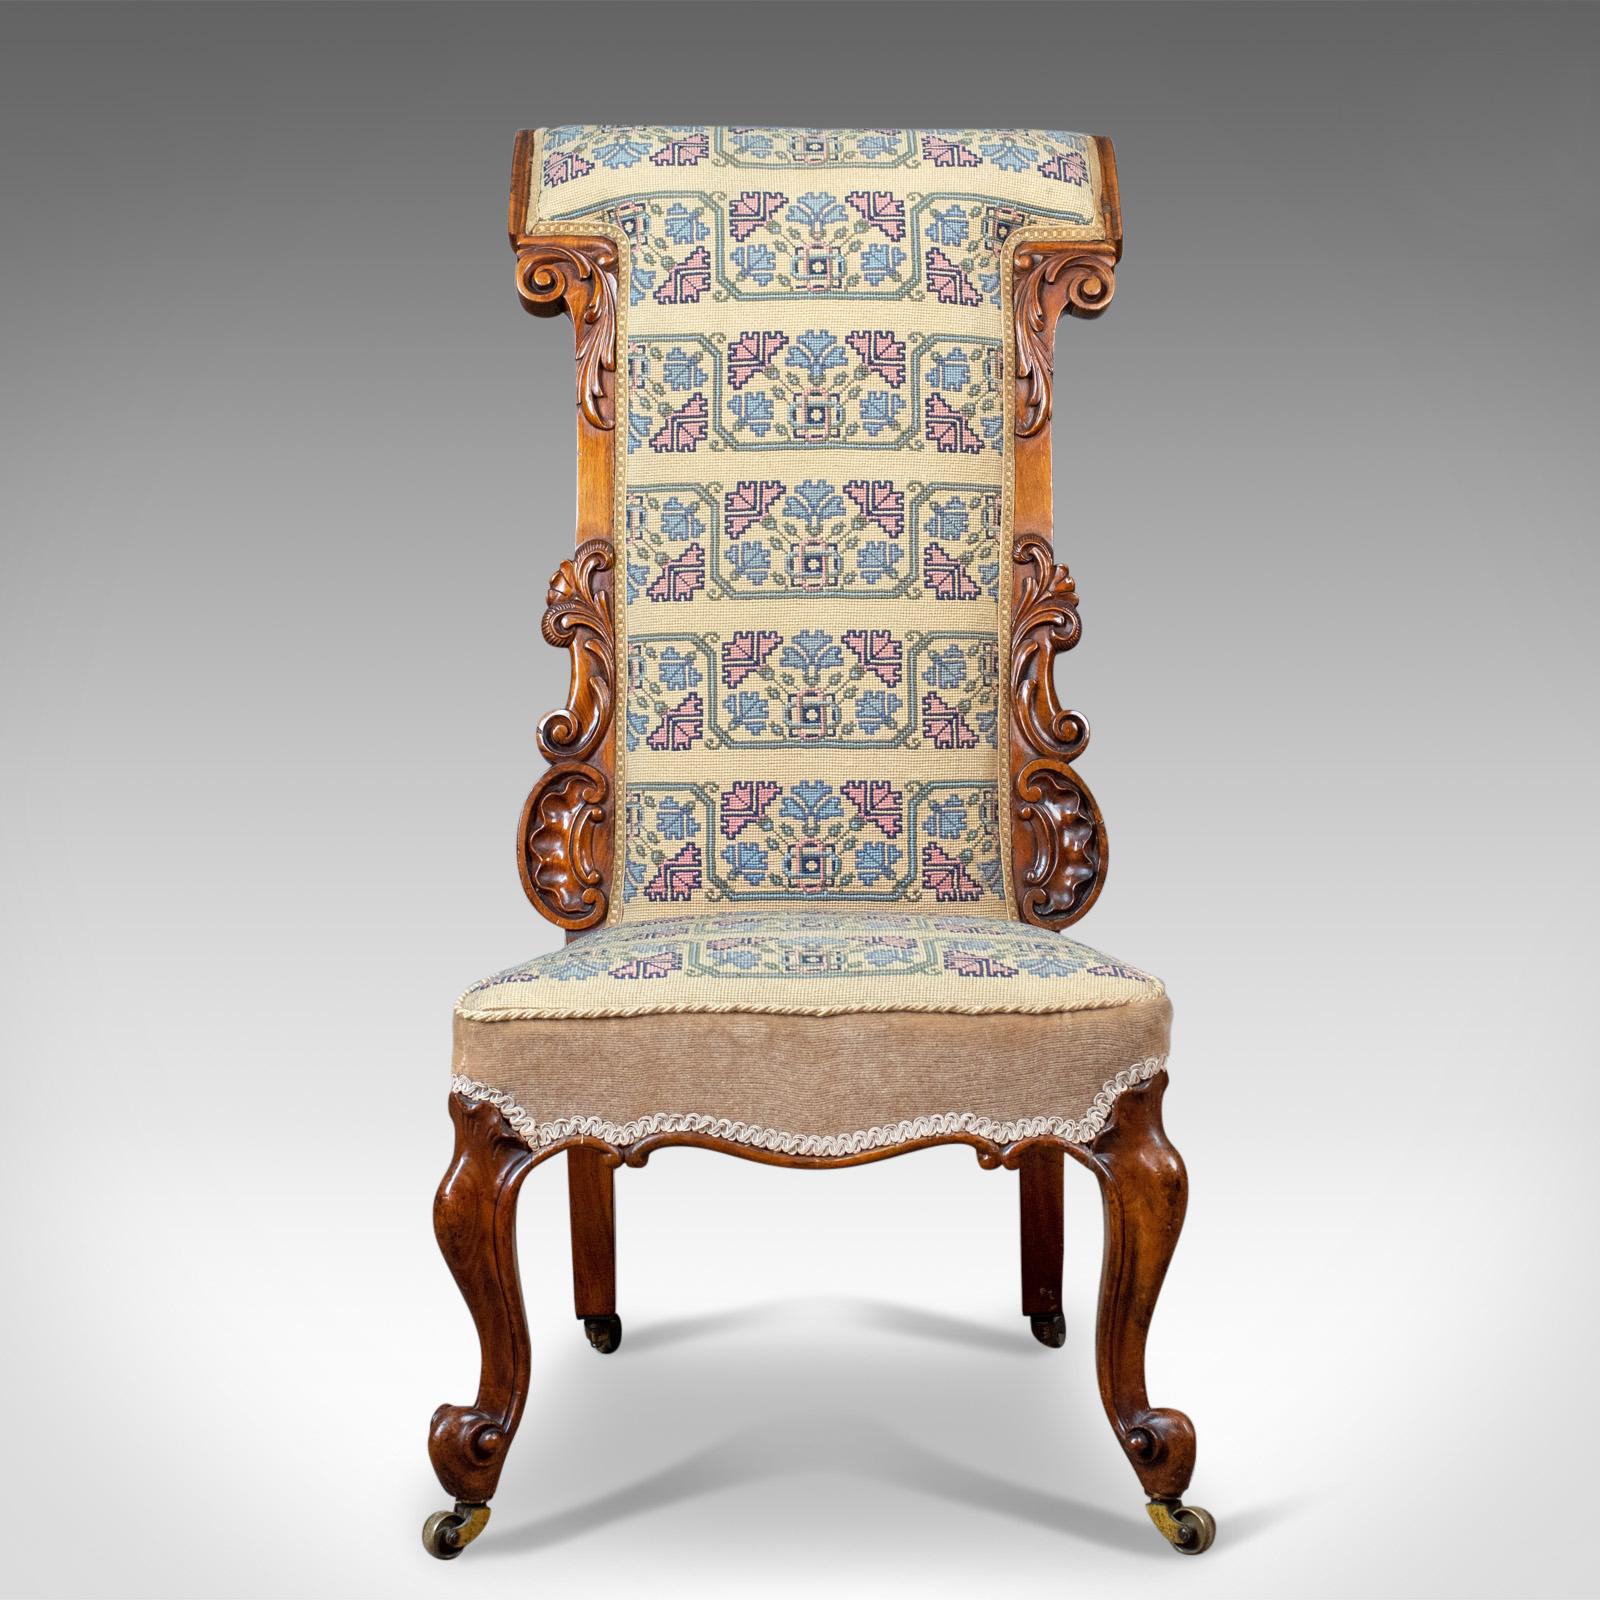 This is an antique prie dieu chair, a 19th century, early Victorian chair in walnut with a needlepoint tapestry seat cover. Ideal as a bedroom side chair and dating to circa 1840. 

The walnut displaying good color and grain interest
Raised upon